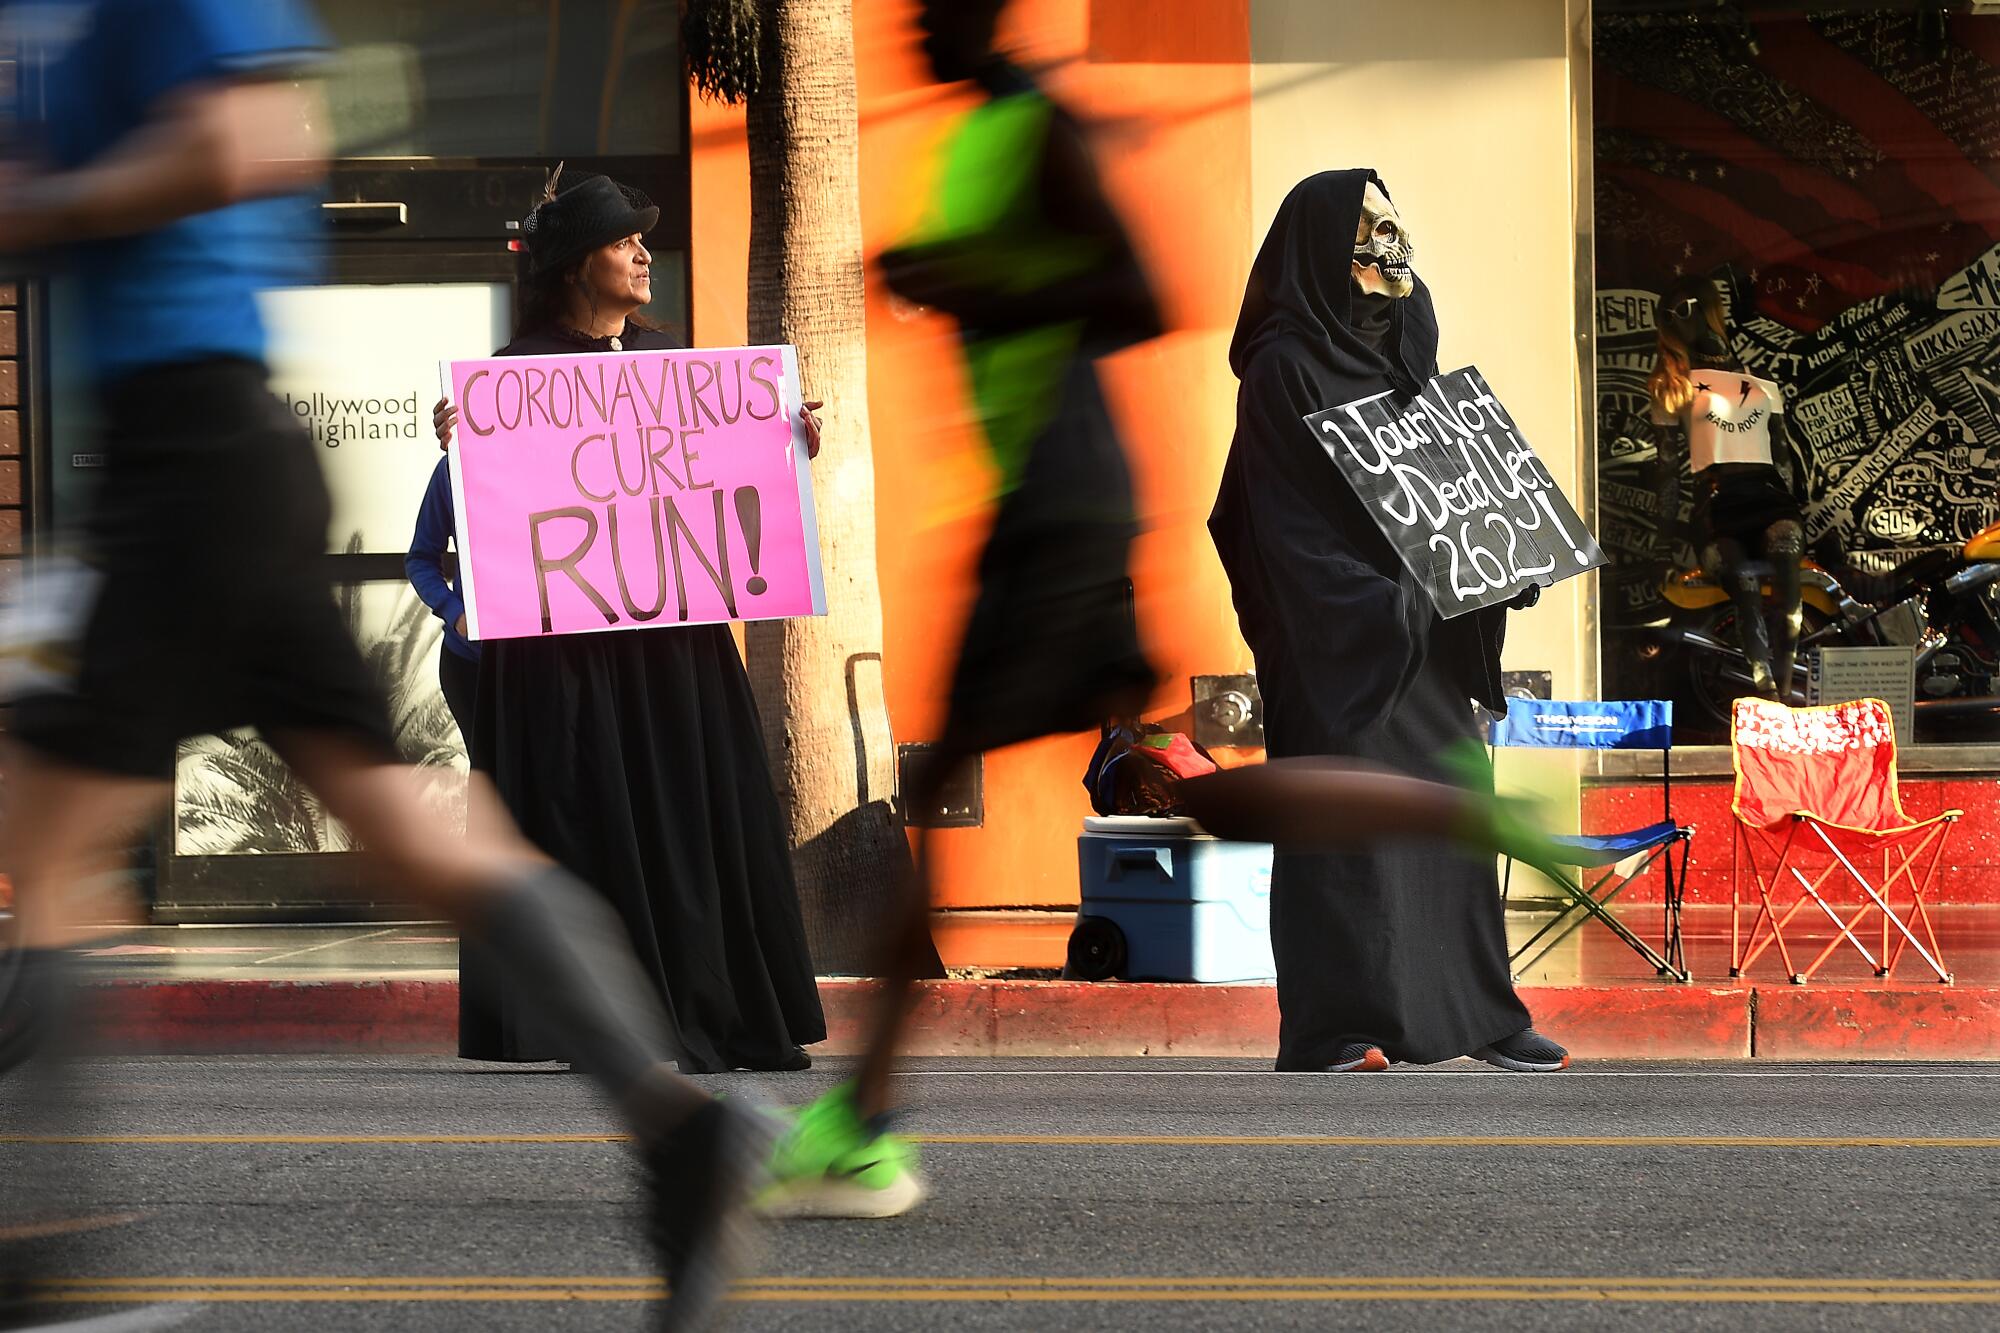 Janette Cardona and her husband, Louie, hold signs along Hollywood Blvd. as runners compete during L.A. Marathon.